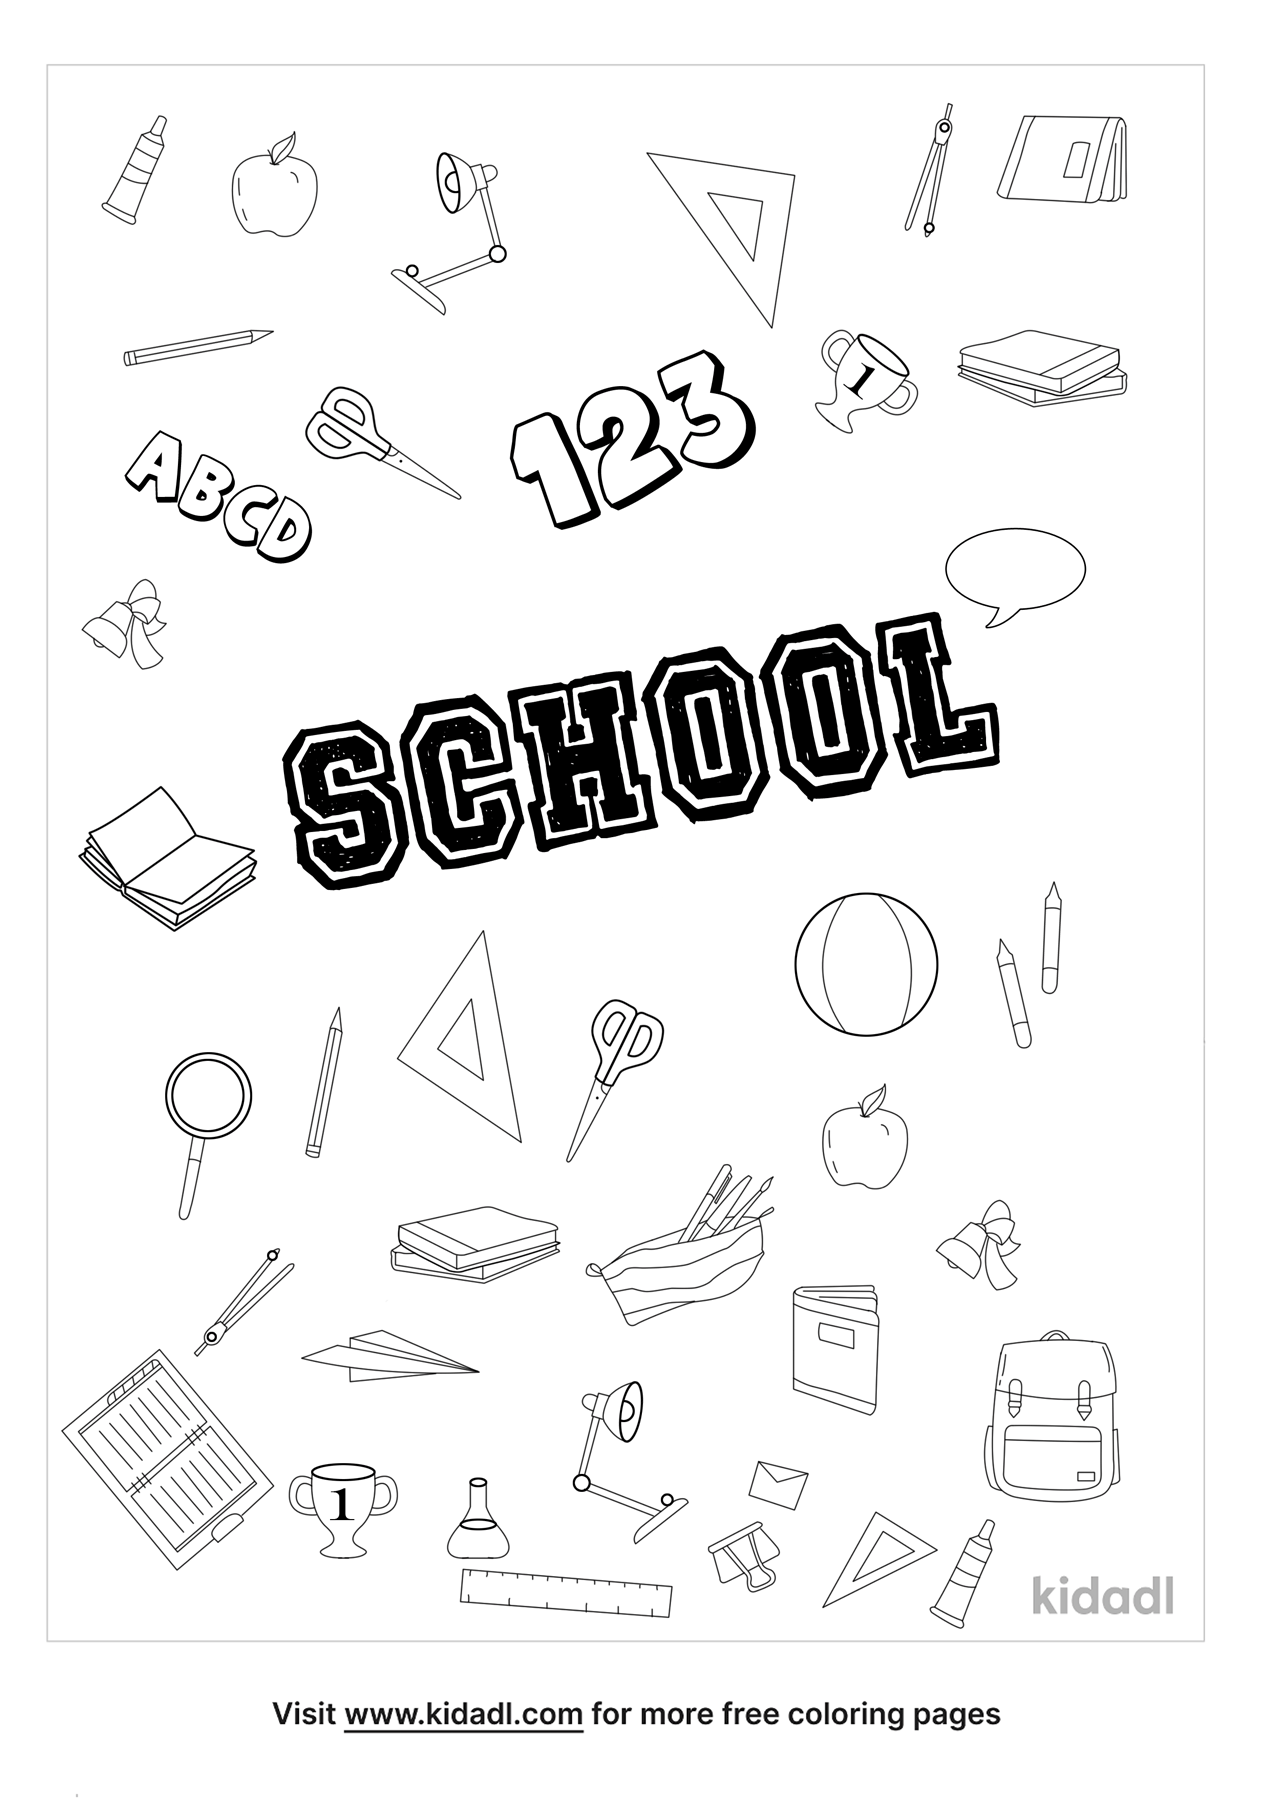 Equivalent Fractions Coloring Pages | Free School Coloring Pages | Kidadl